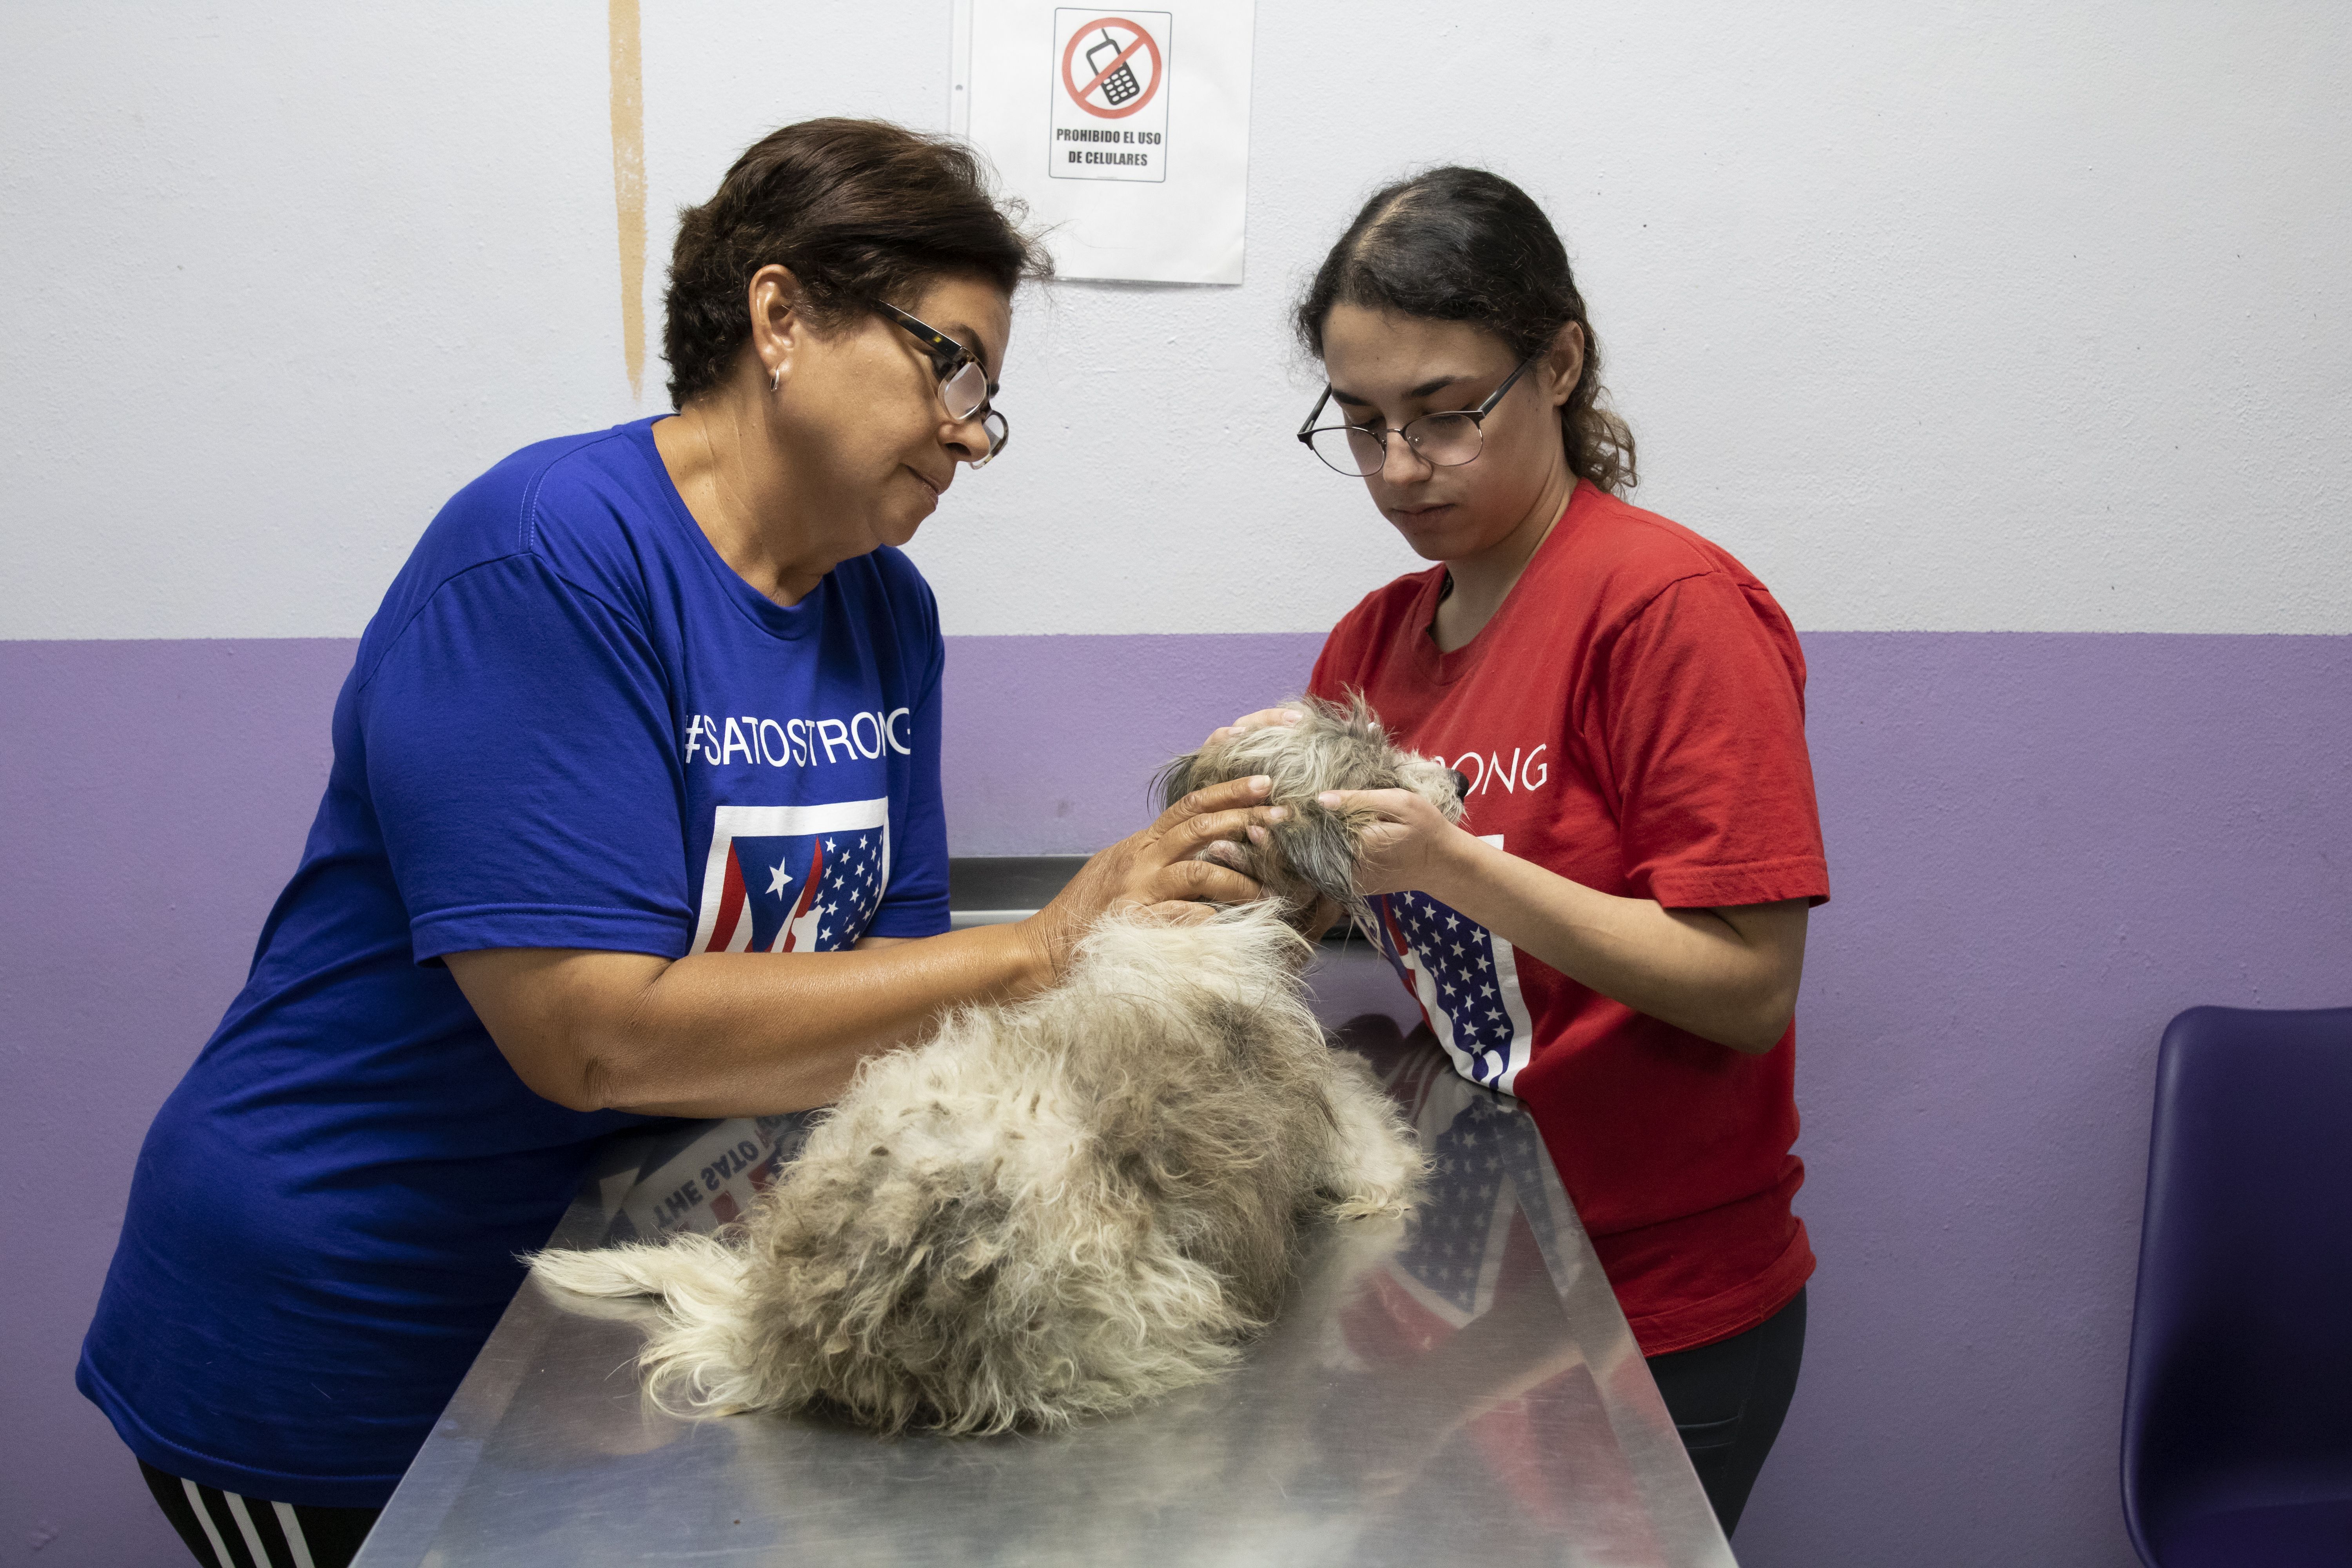 A dog who had recently given birth undergoes veterinary evaluations to assess her health. Image by Jamie Holt. United States, 2019.